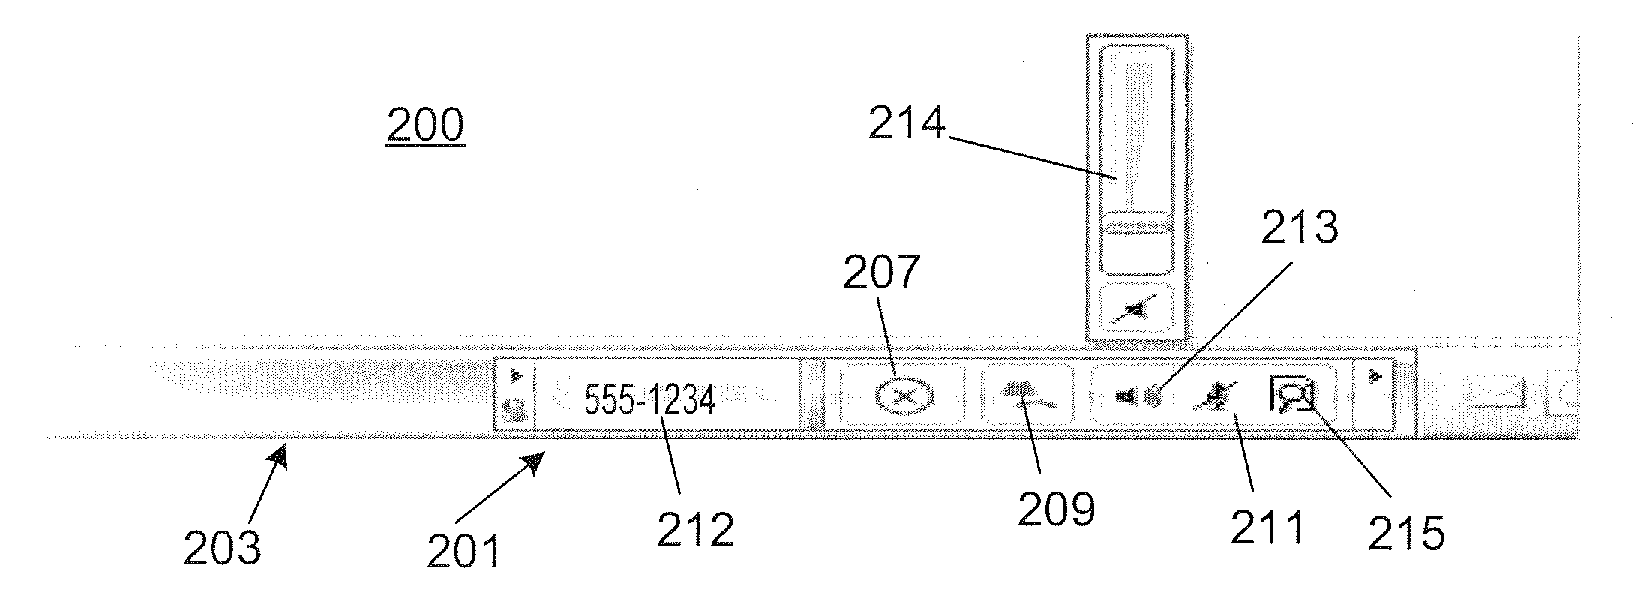 Graphical user interface for telephony device